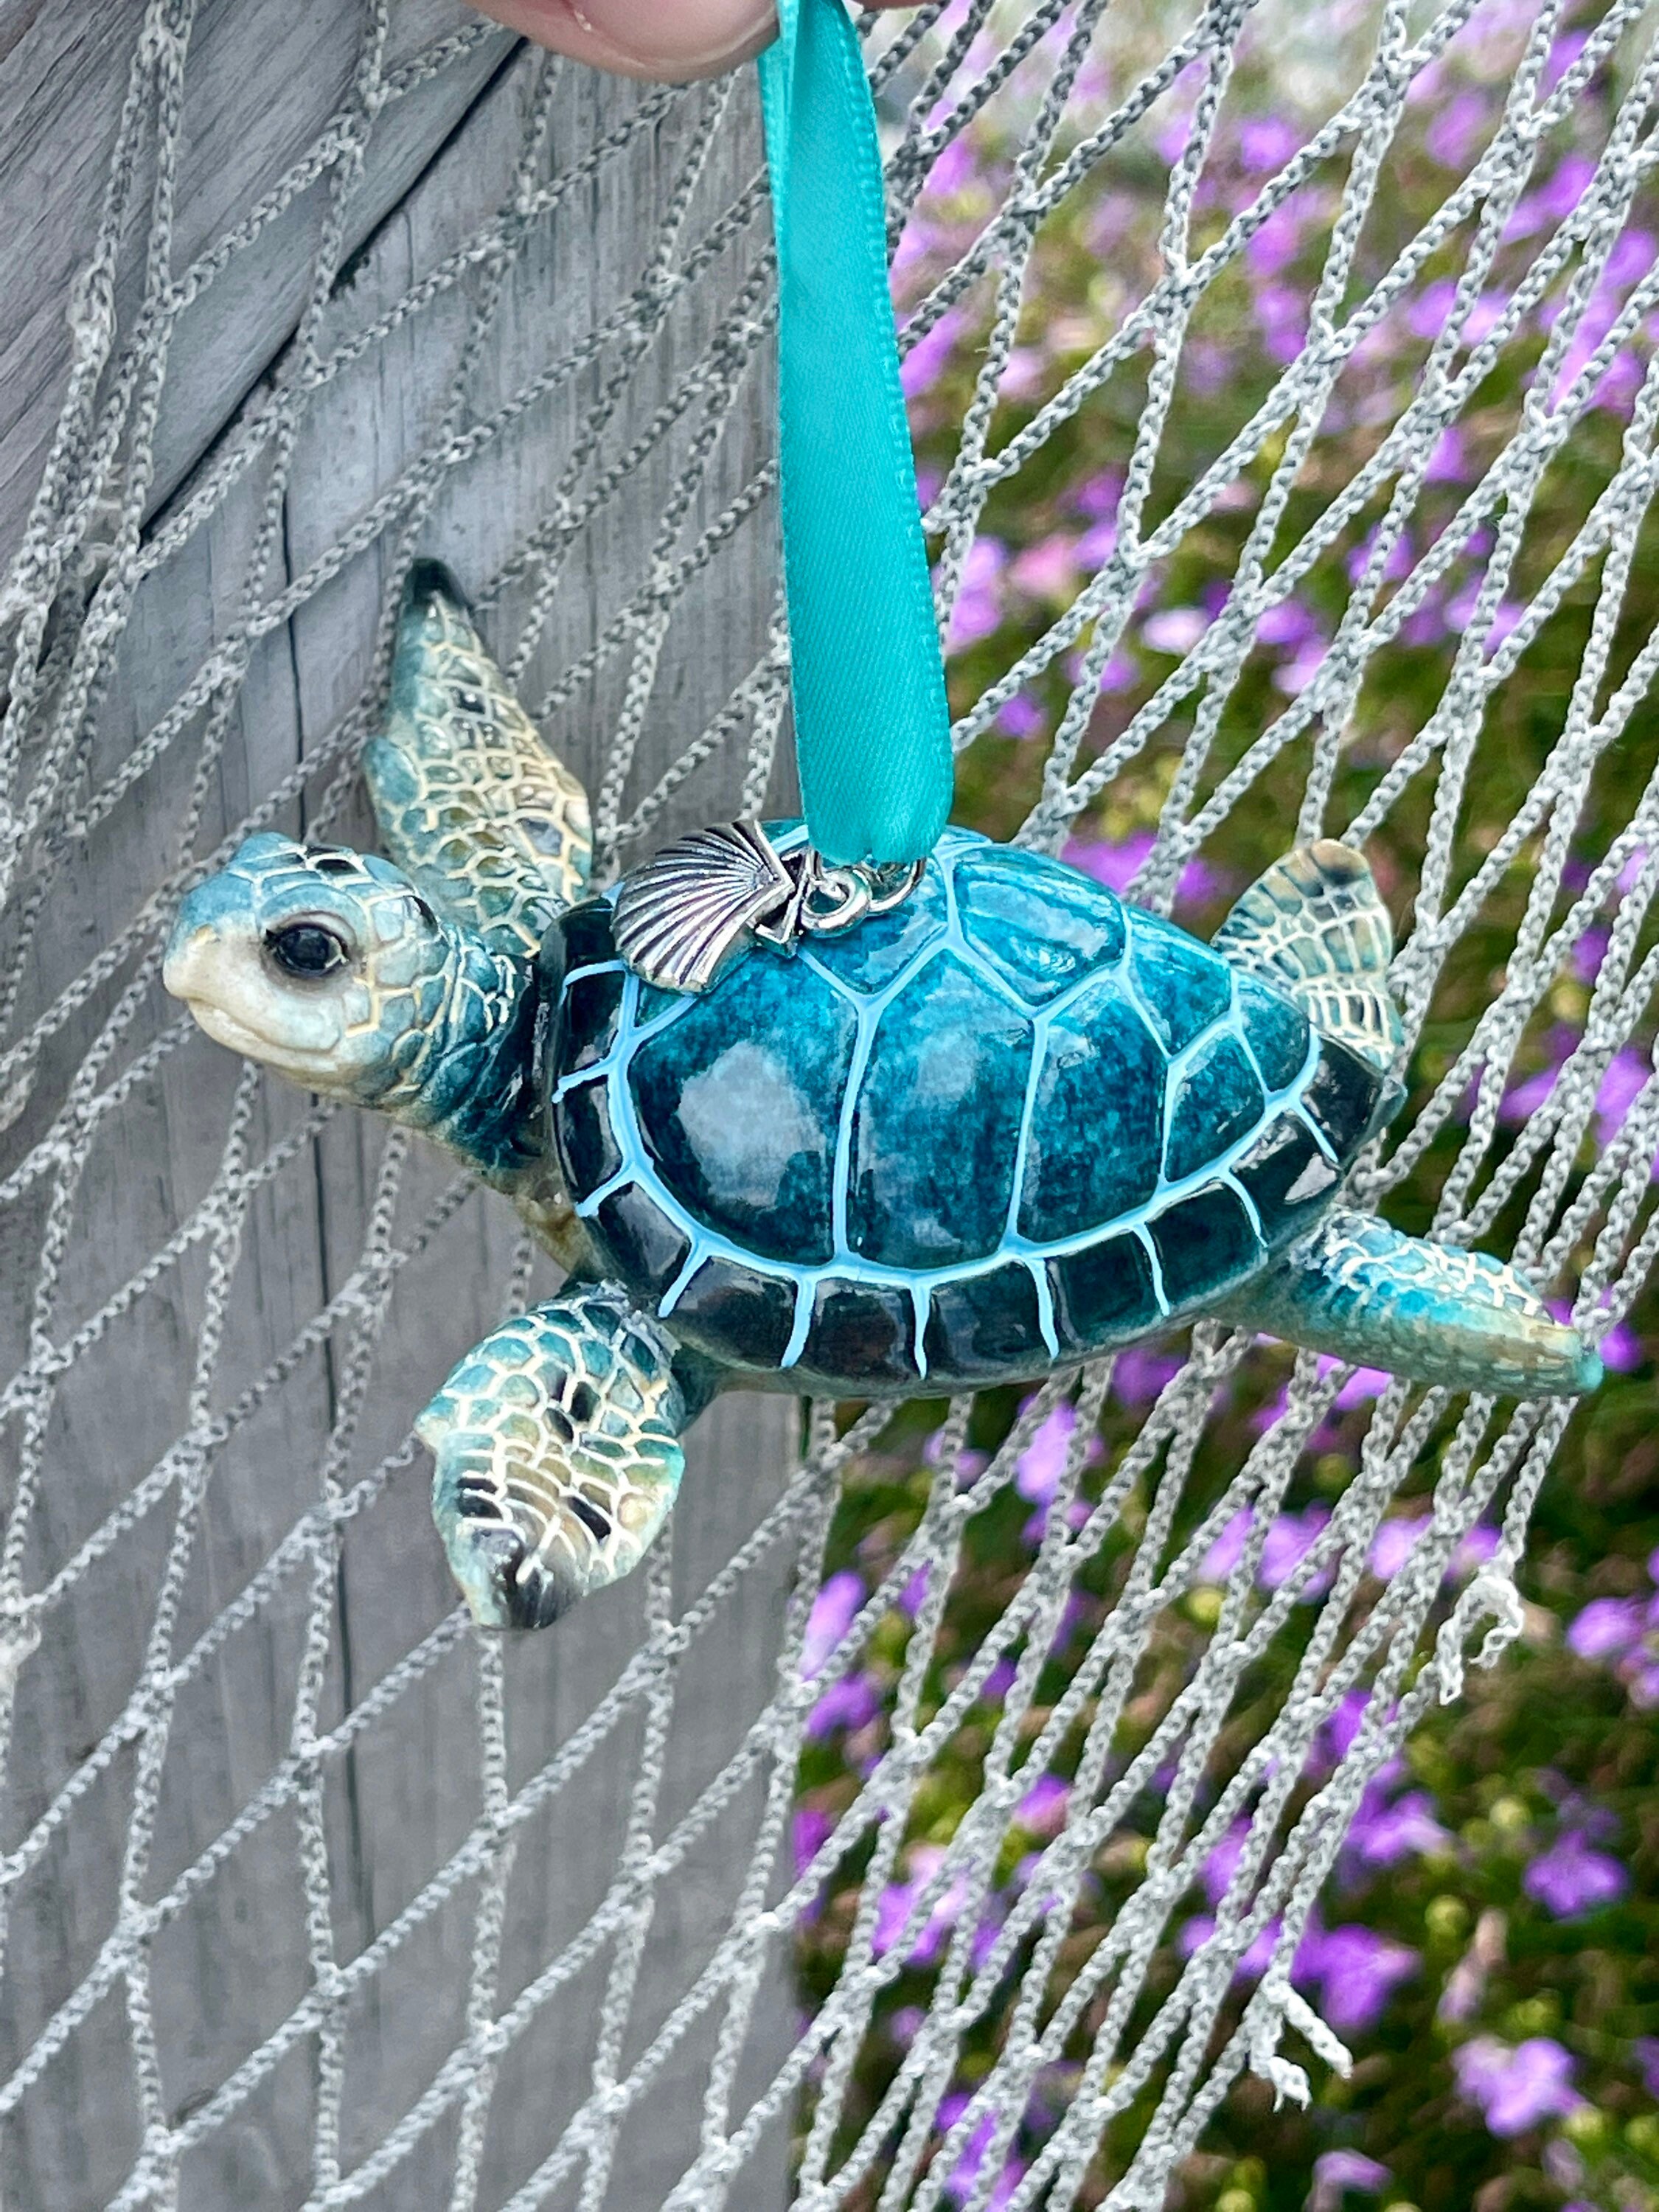 Sea Turtle Hanging Ornament Things For Car Vehicle Ornaments